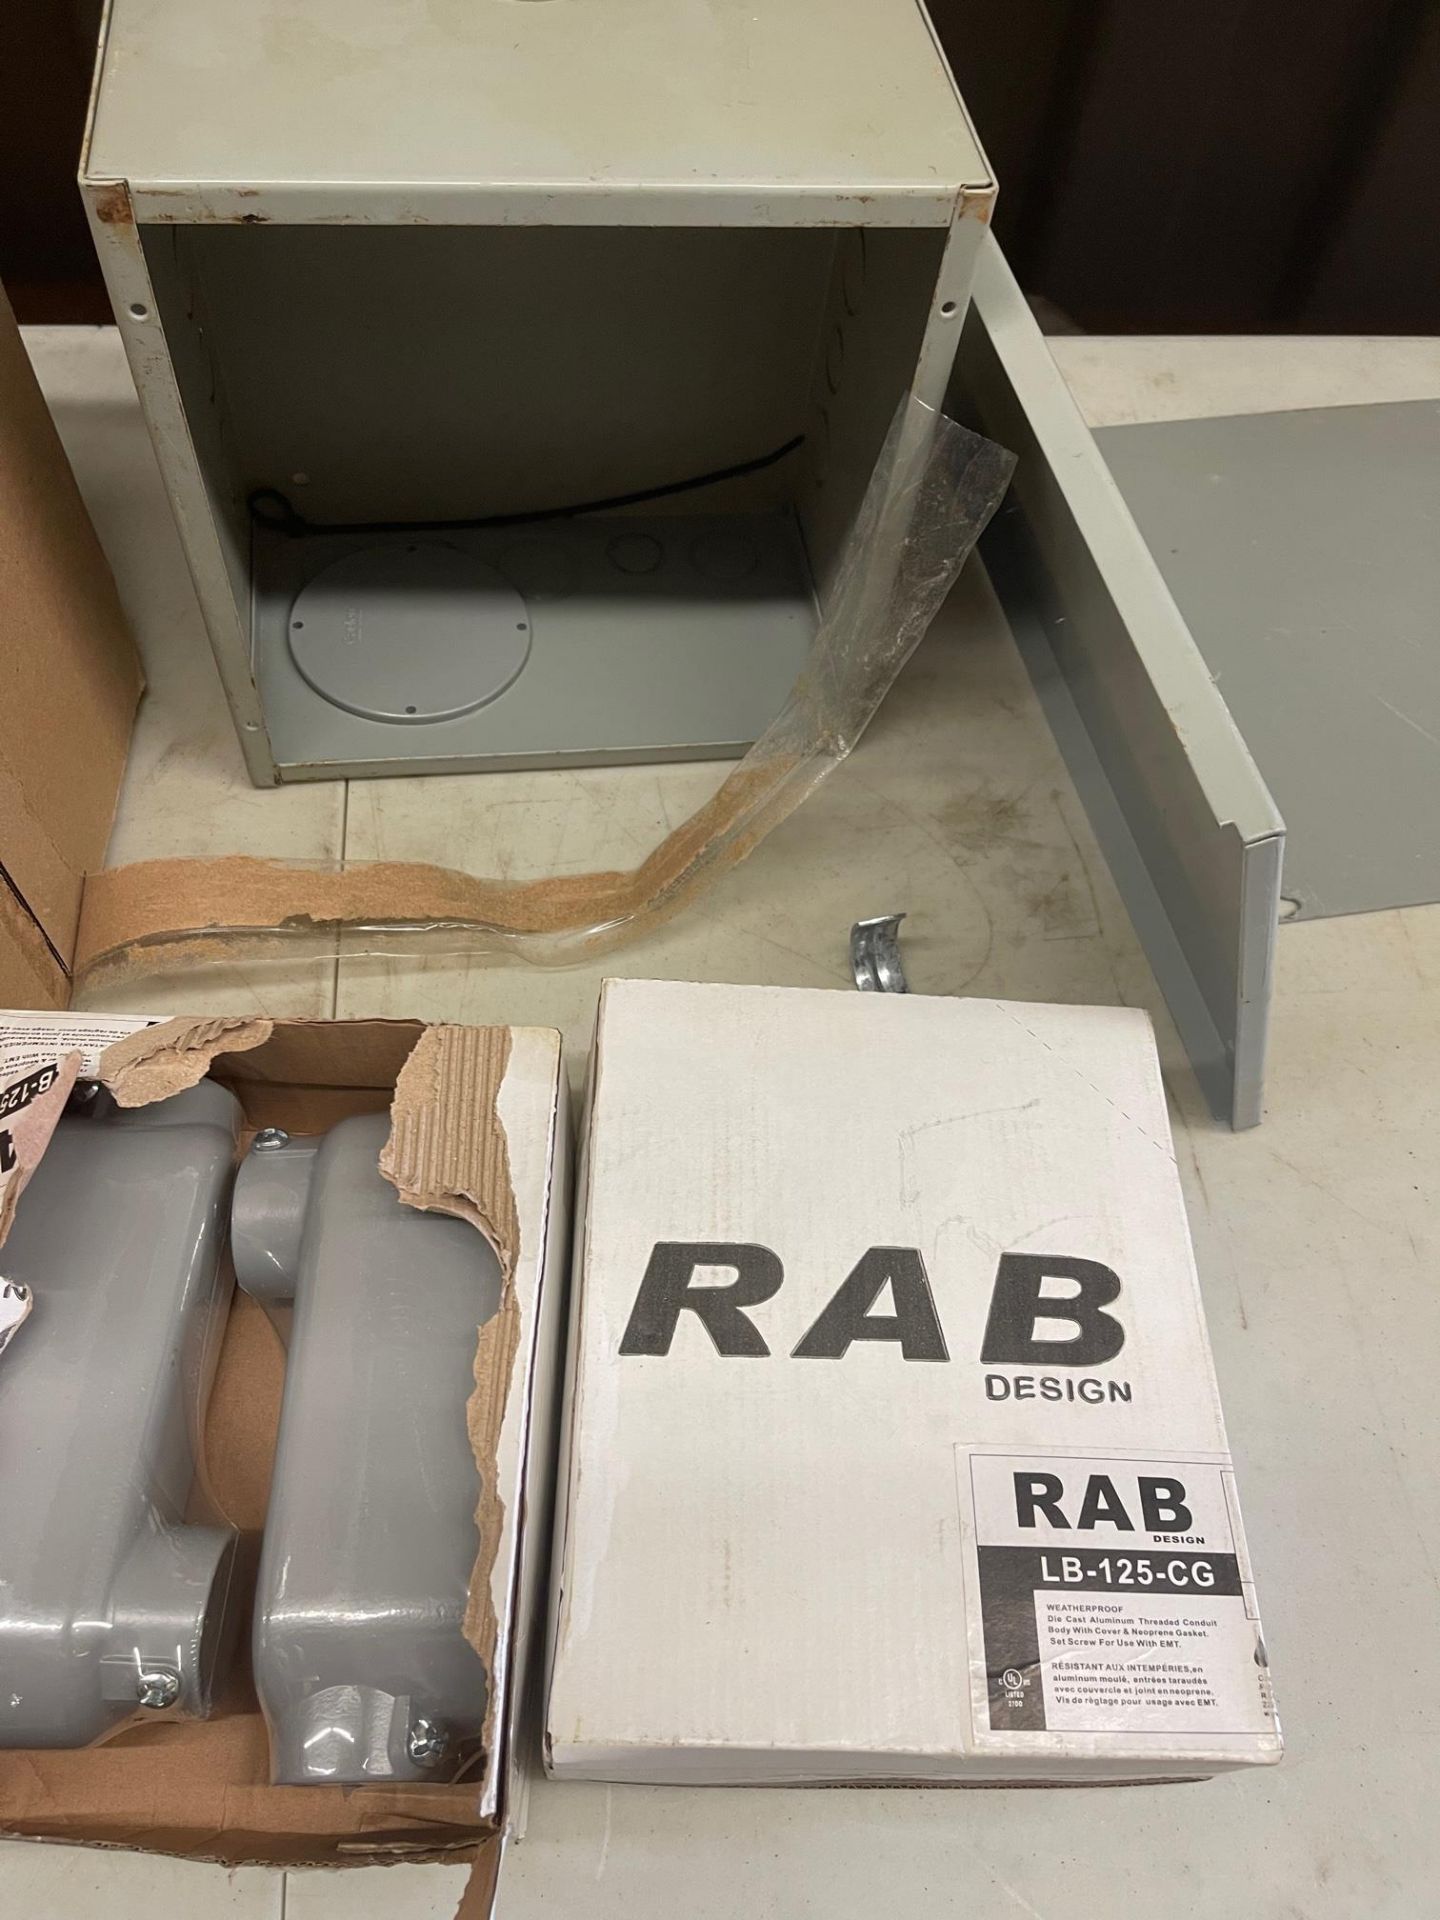 LOT/ 66/ 22, RAB LB -125-CG (4), CADDY SK3251, SQUARE 60 AMP FUSED DISCONNECT, RAYCHEM JBS-100 - Image 6 of 7